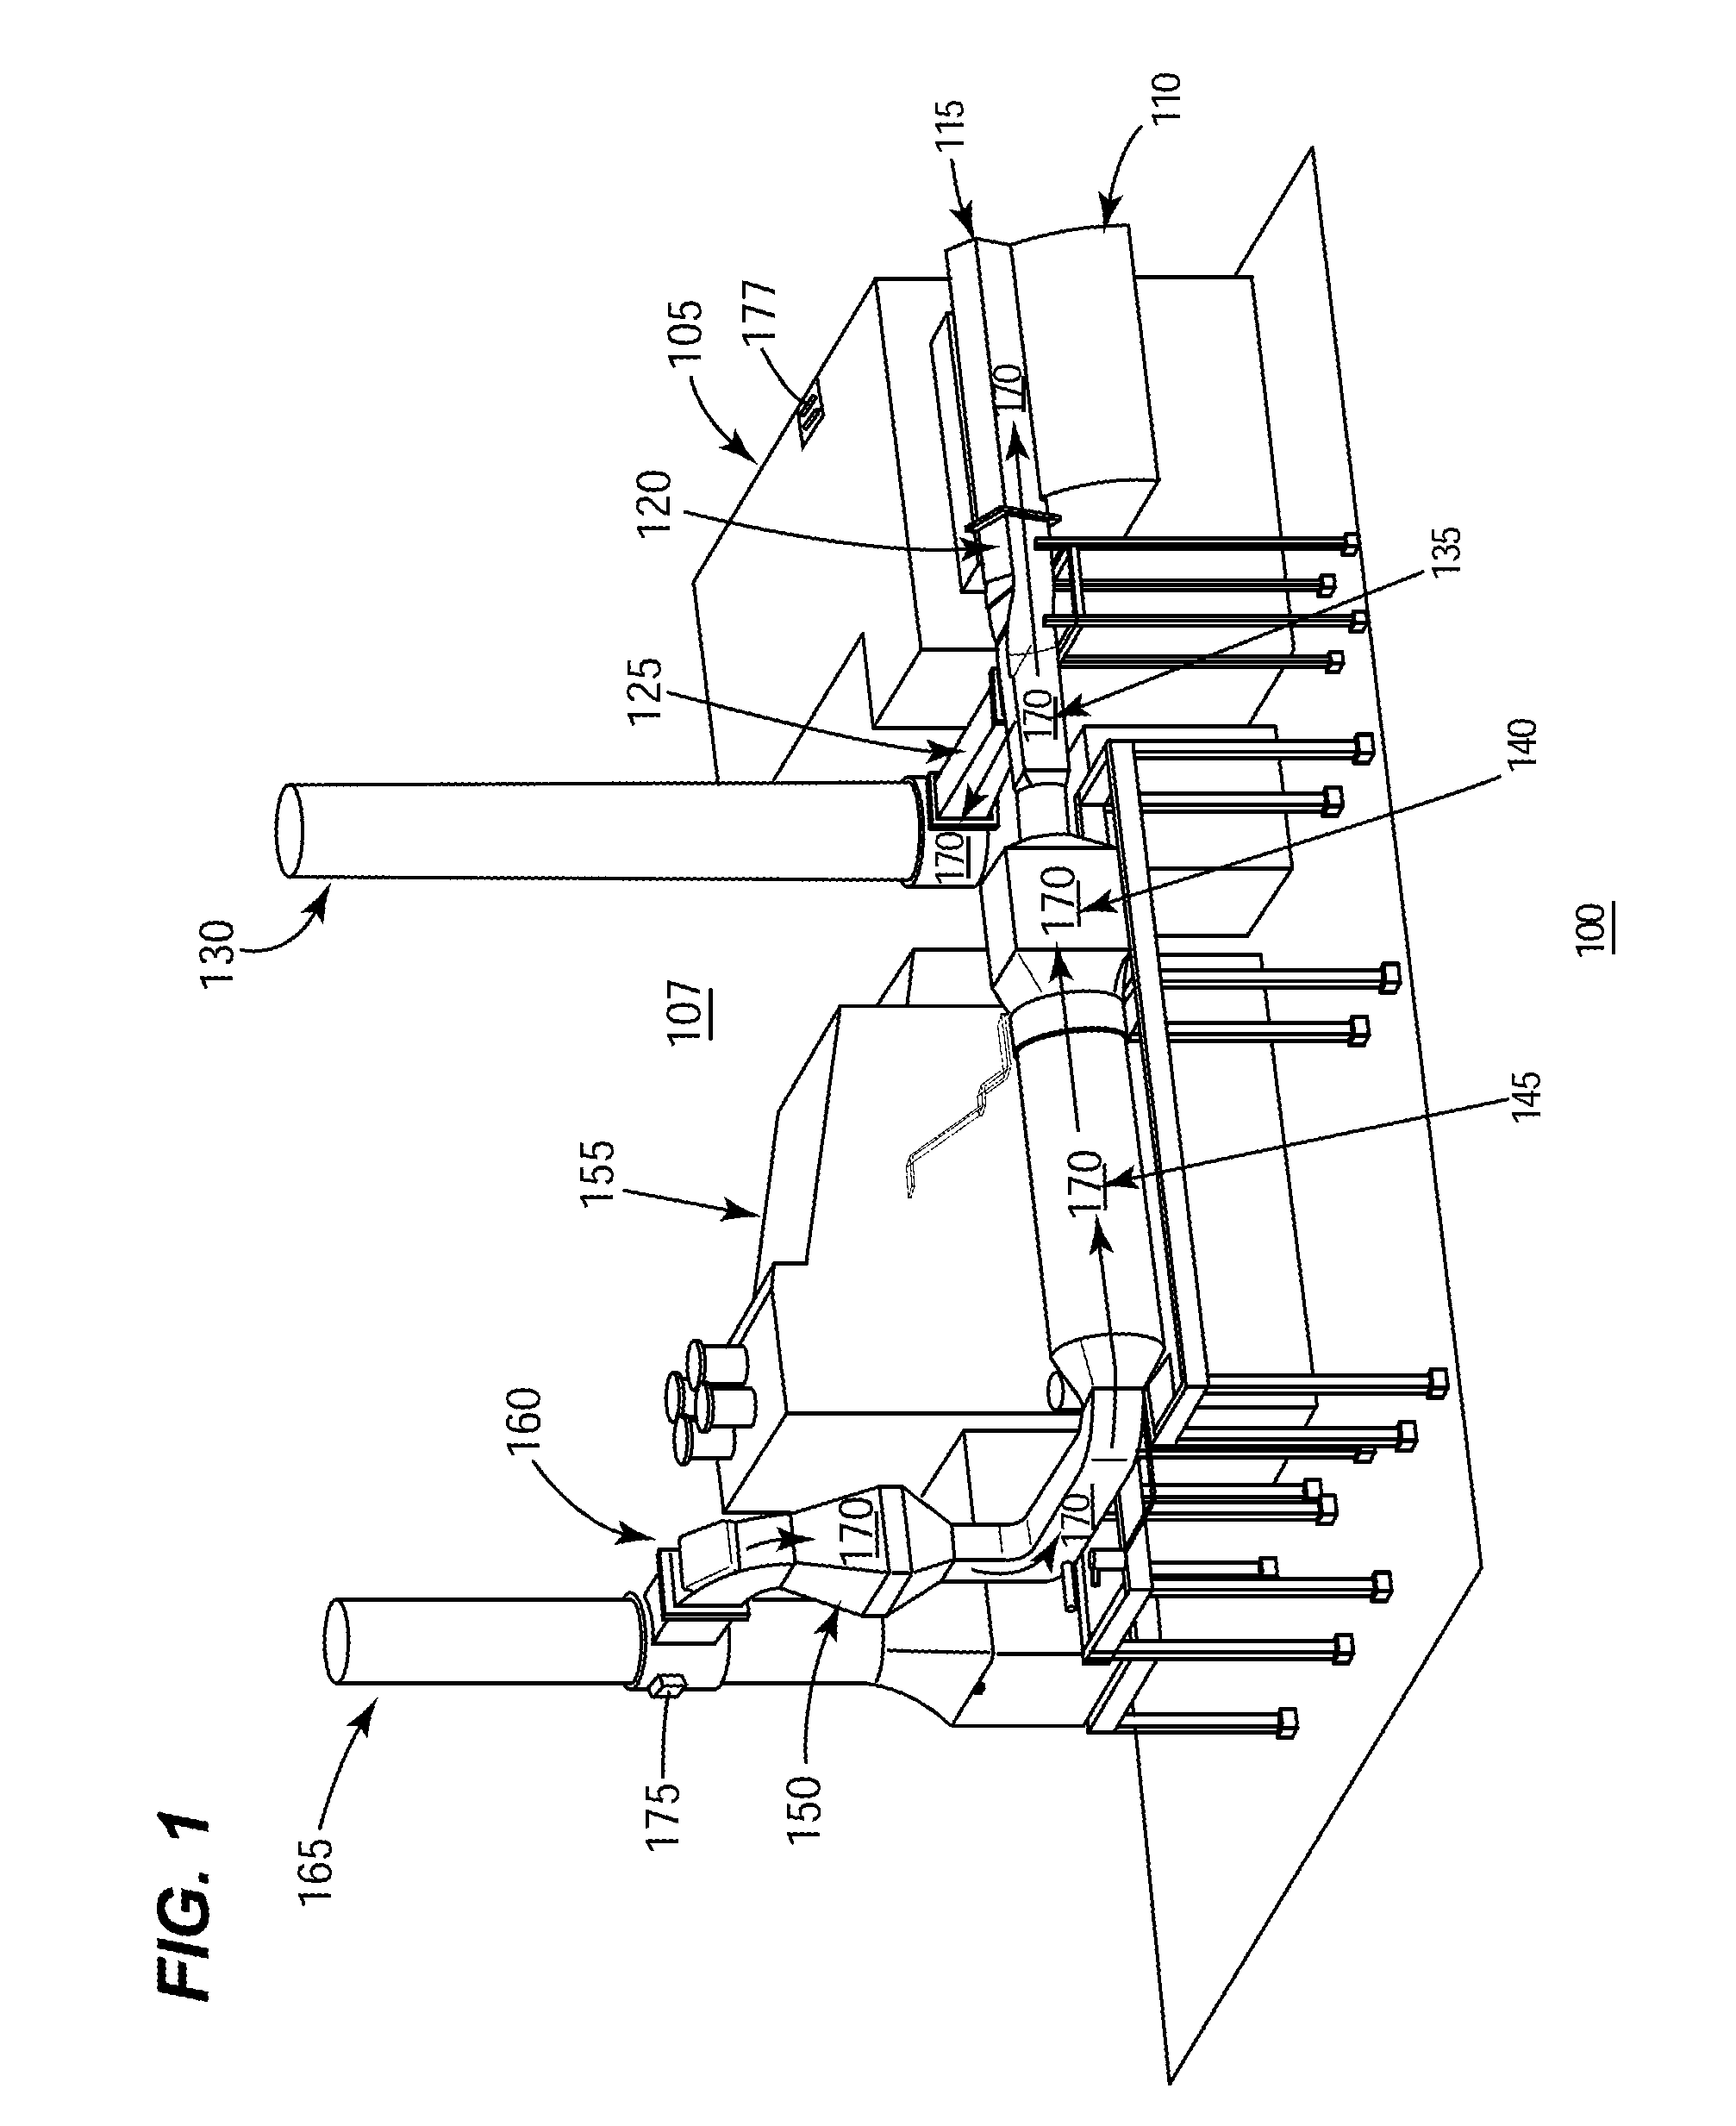 Method and system for controlling a flowrate of a recirculated exhaust gas